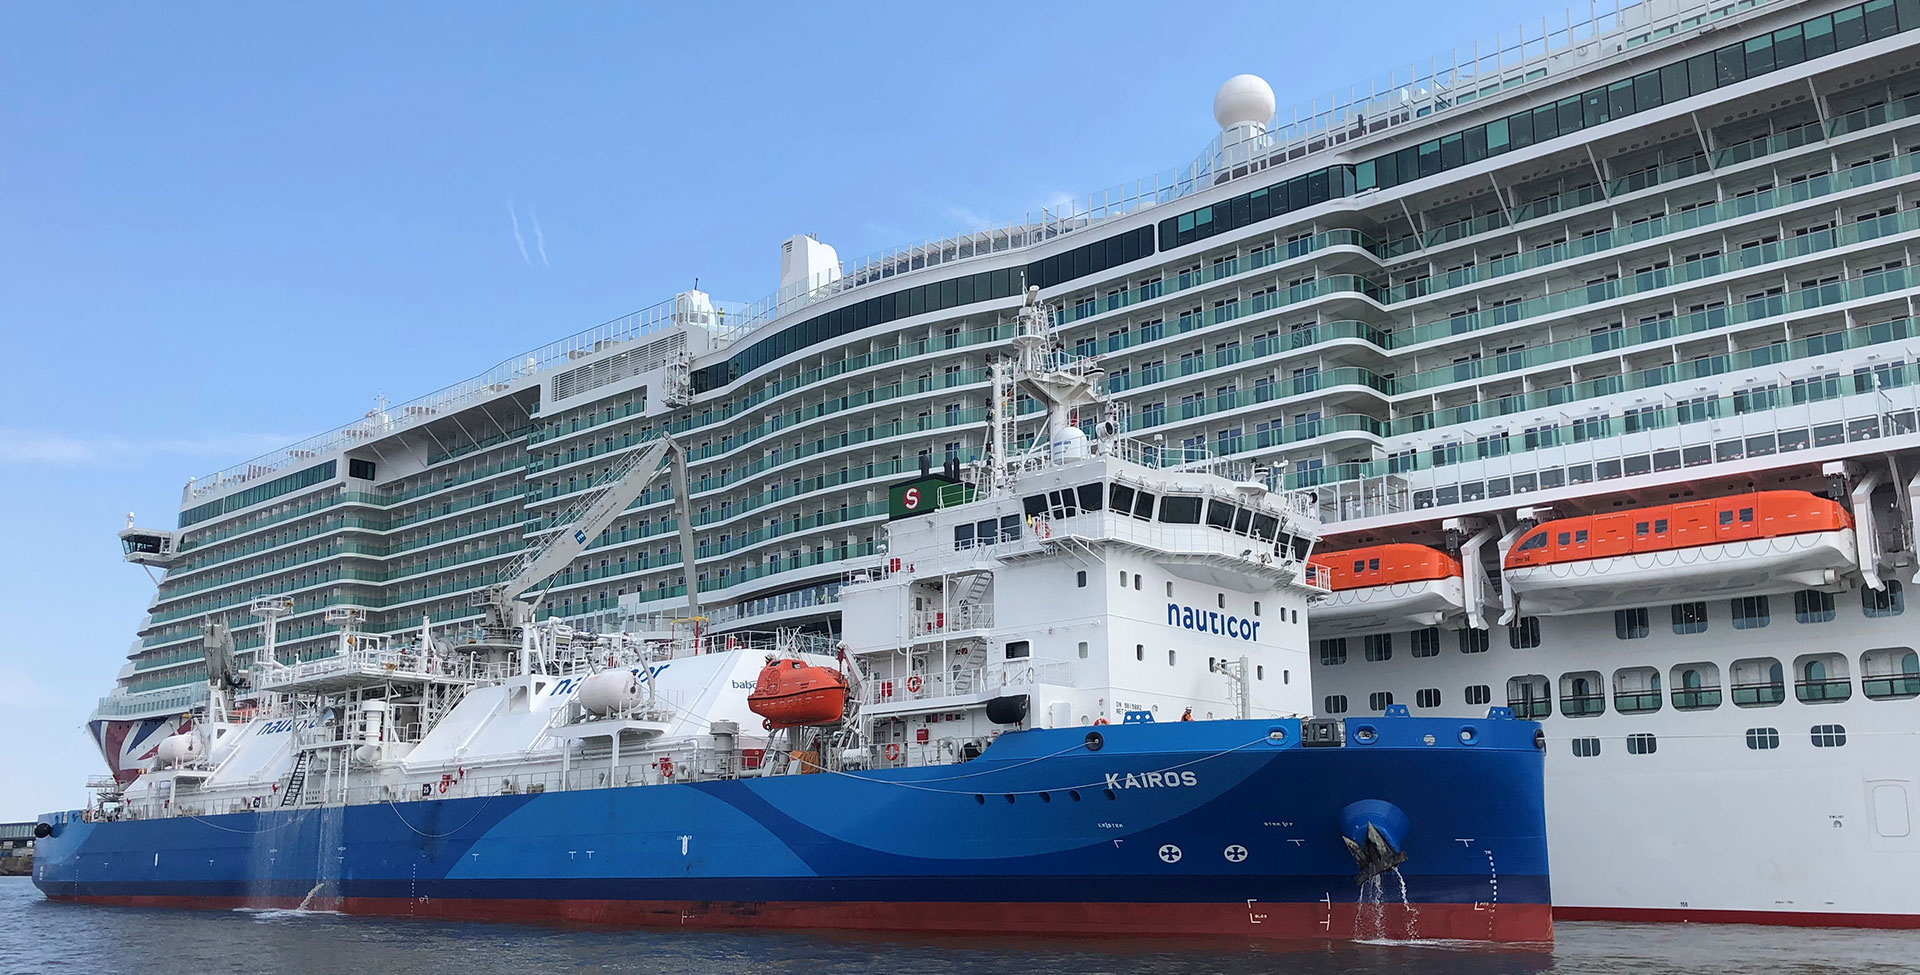 Gasum’s subsidiary Nauticor conducts first ship-to-ship LNG bunkering operation for the newbuild cruise ship Iona